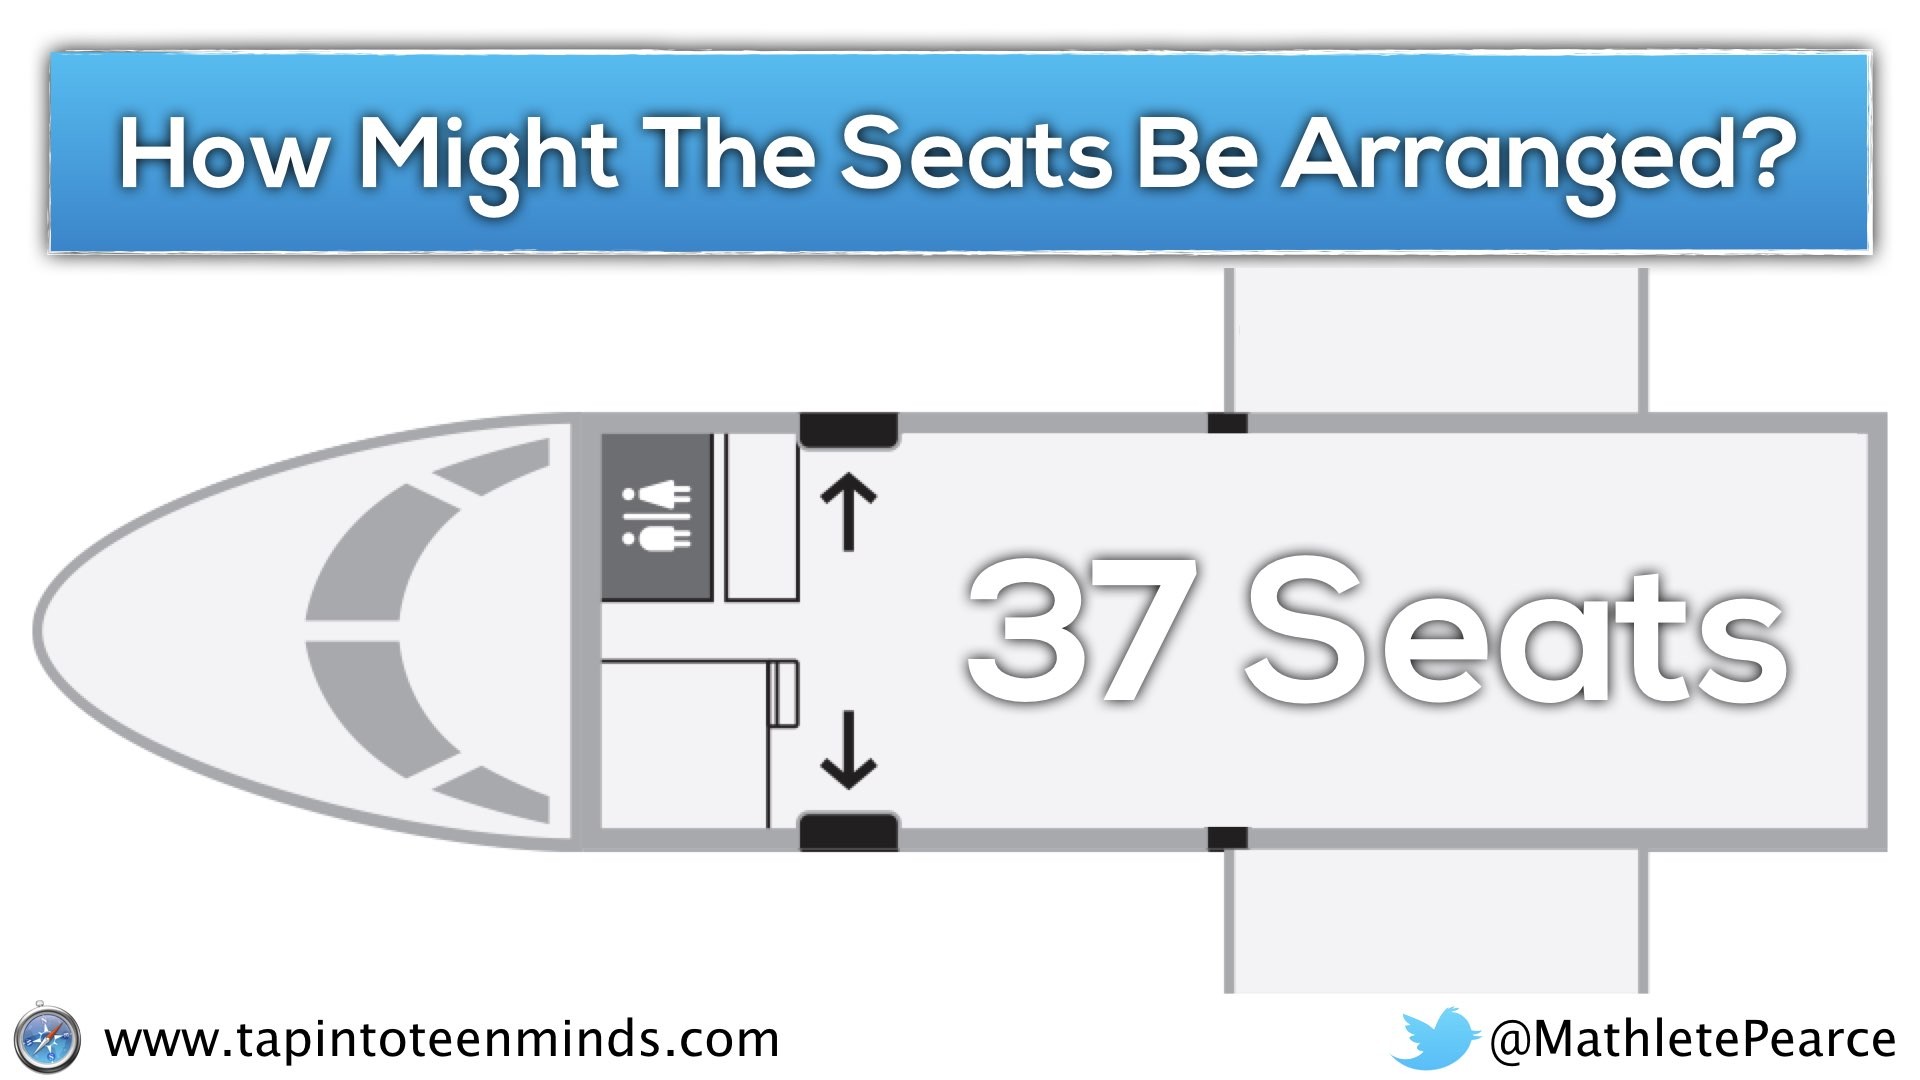 Airplane Task - Second Air Canada Plane Alternative Question - How might the seats be arranged